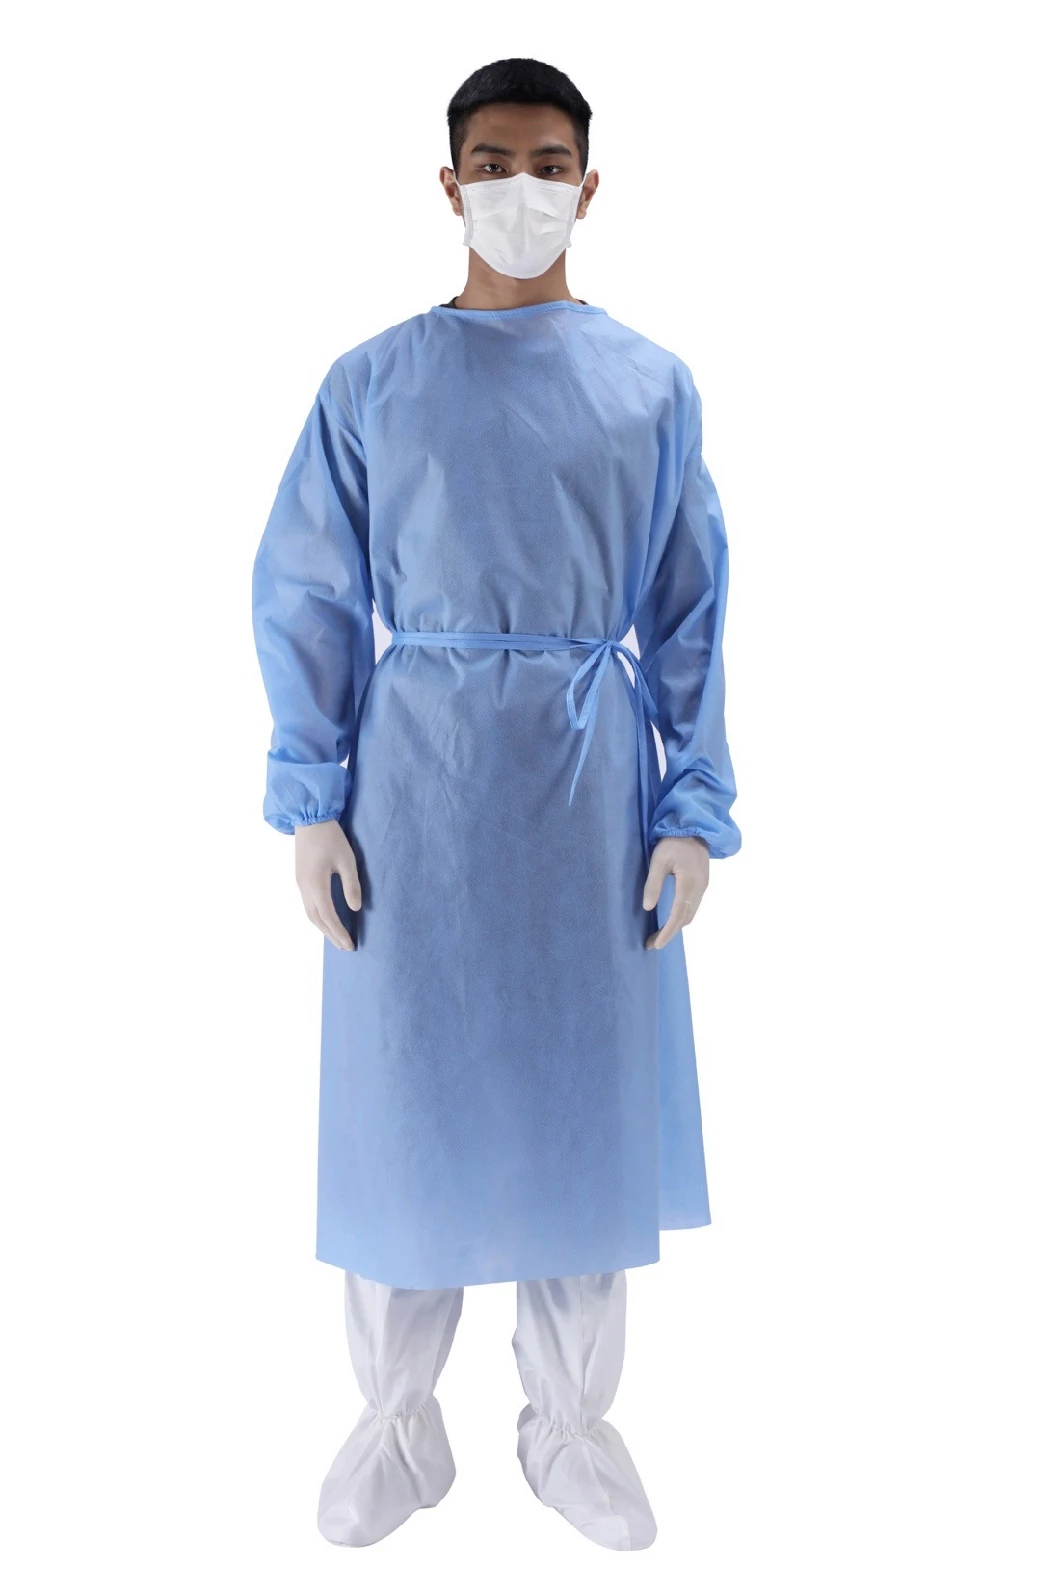 Factory Nonwoven Surgical En 13485 Isolation Gown with PP/SMS/PP+PE Material